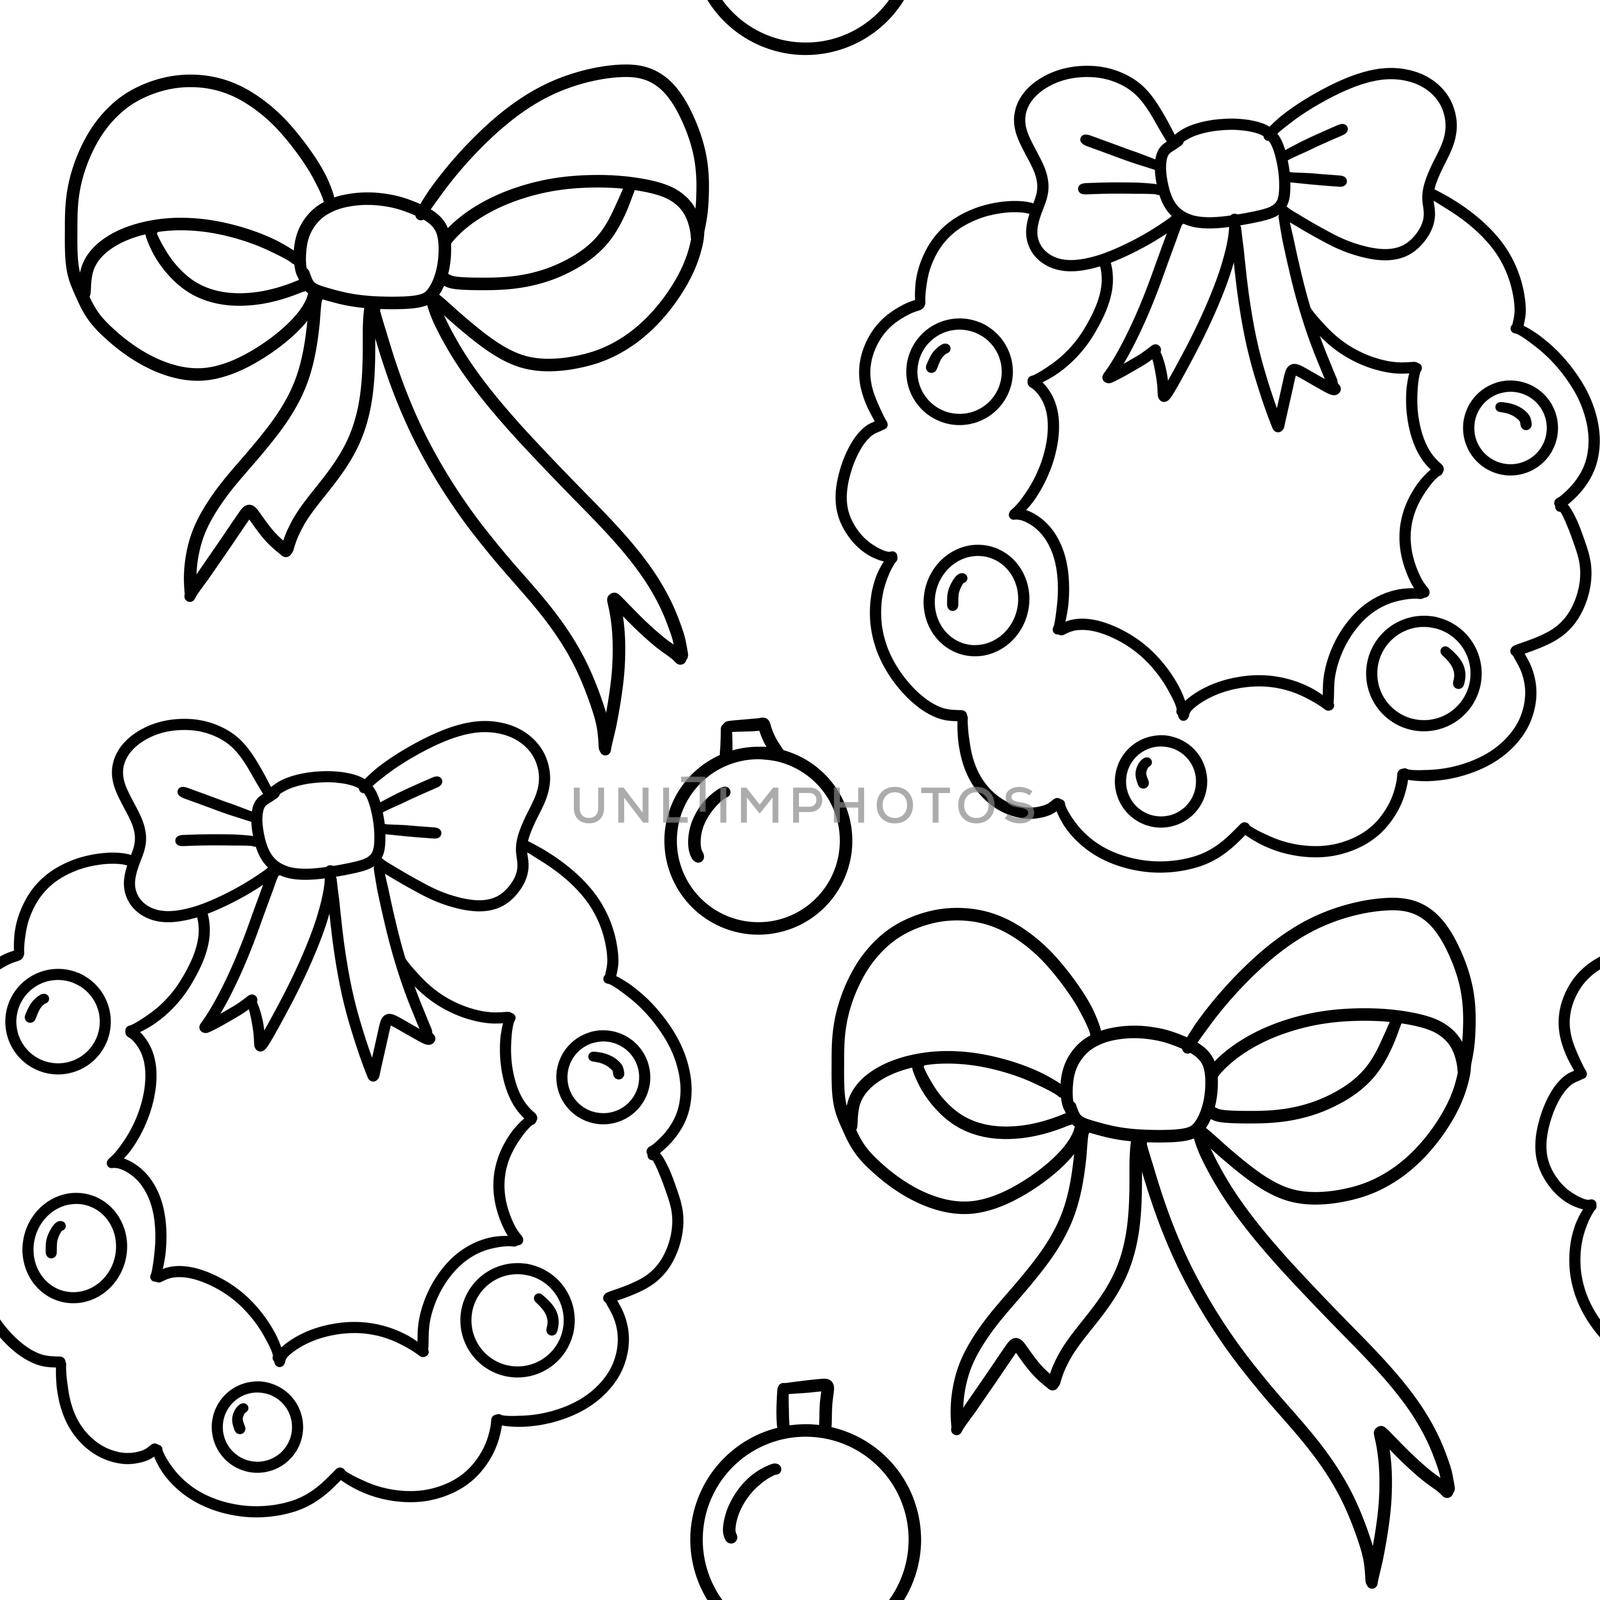 Hand drawn black and white seamless pattern with Christmas winter trees ornaments. Nordic Scandinavian new year december minimalist design, cute fabric print, cartoon doodle style. by Lagmar